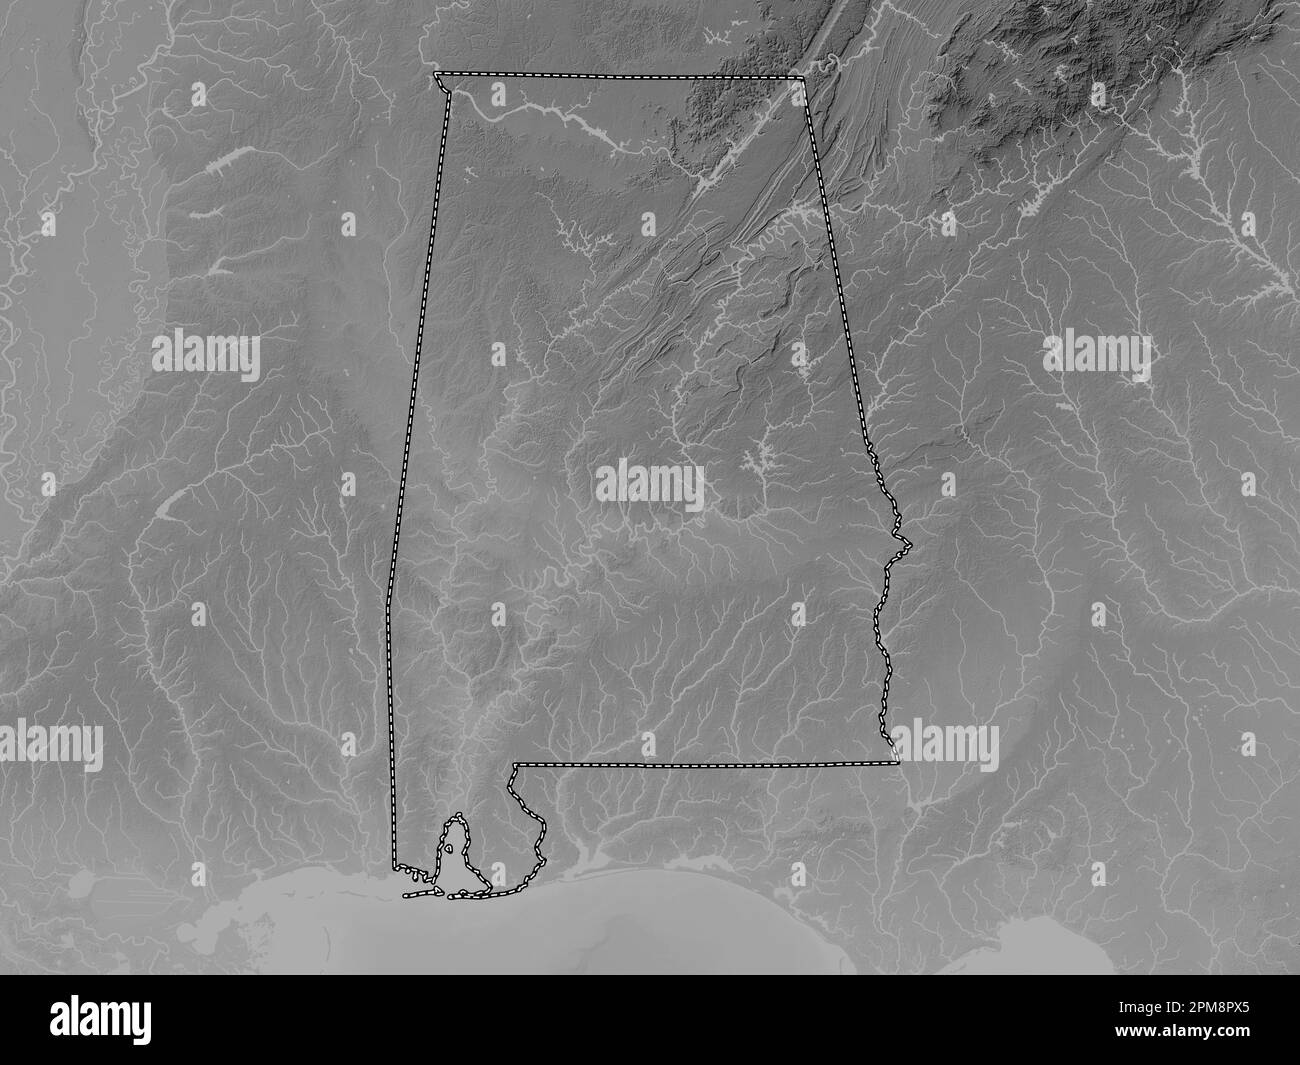 Alabama, state of United States of America. Grayscale elevation map with lakes and rivers Stock Photo